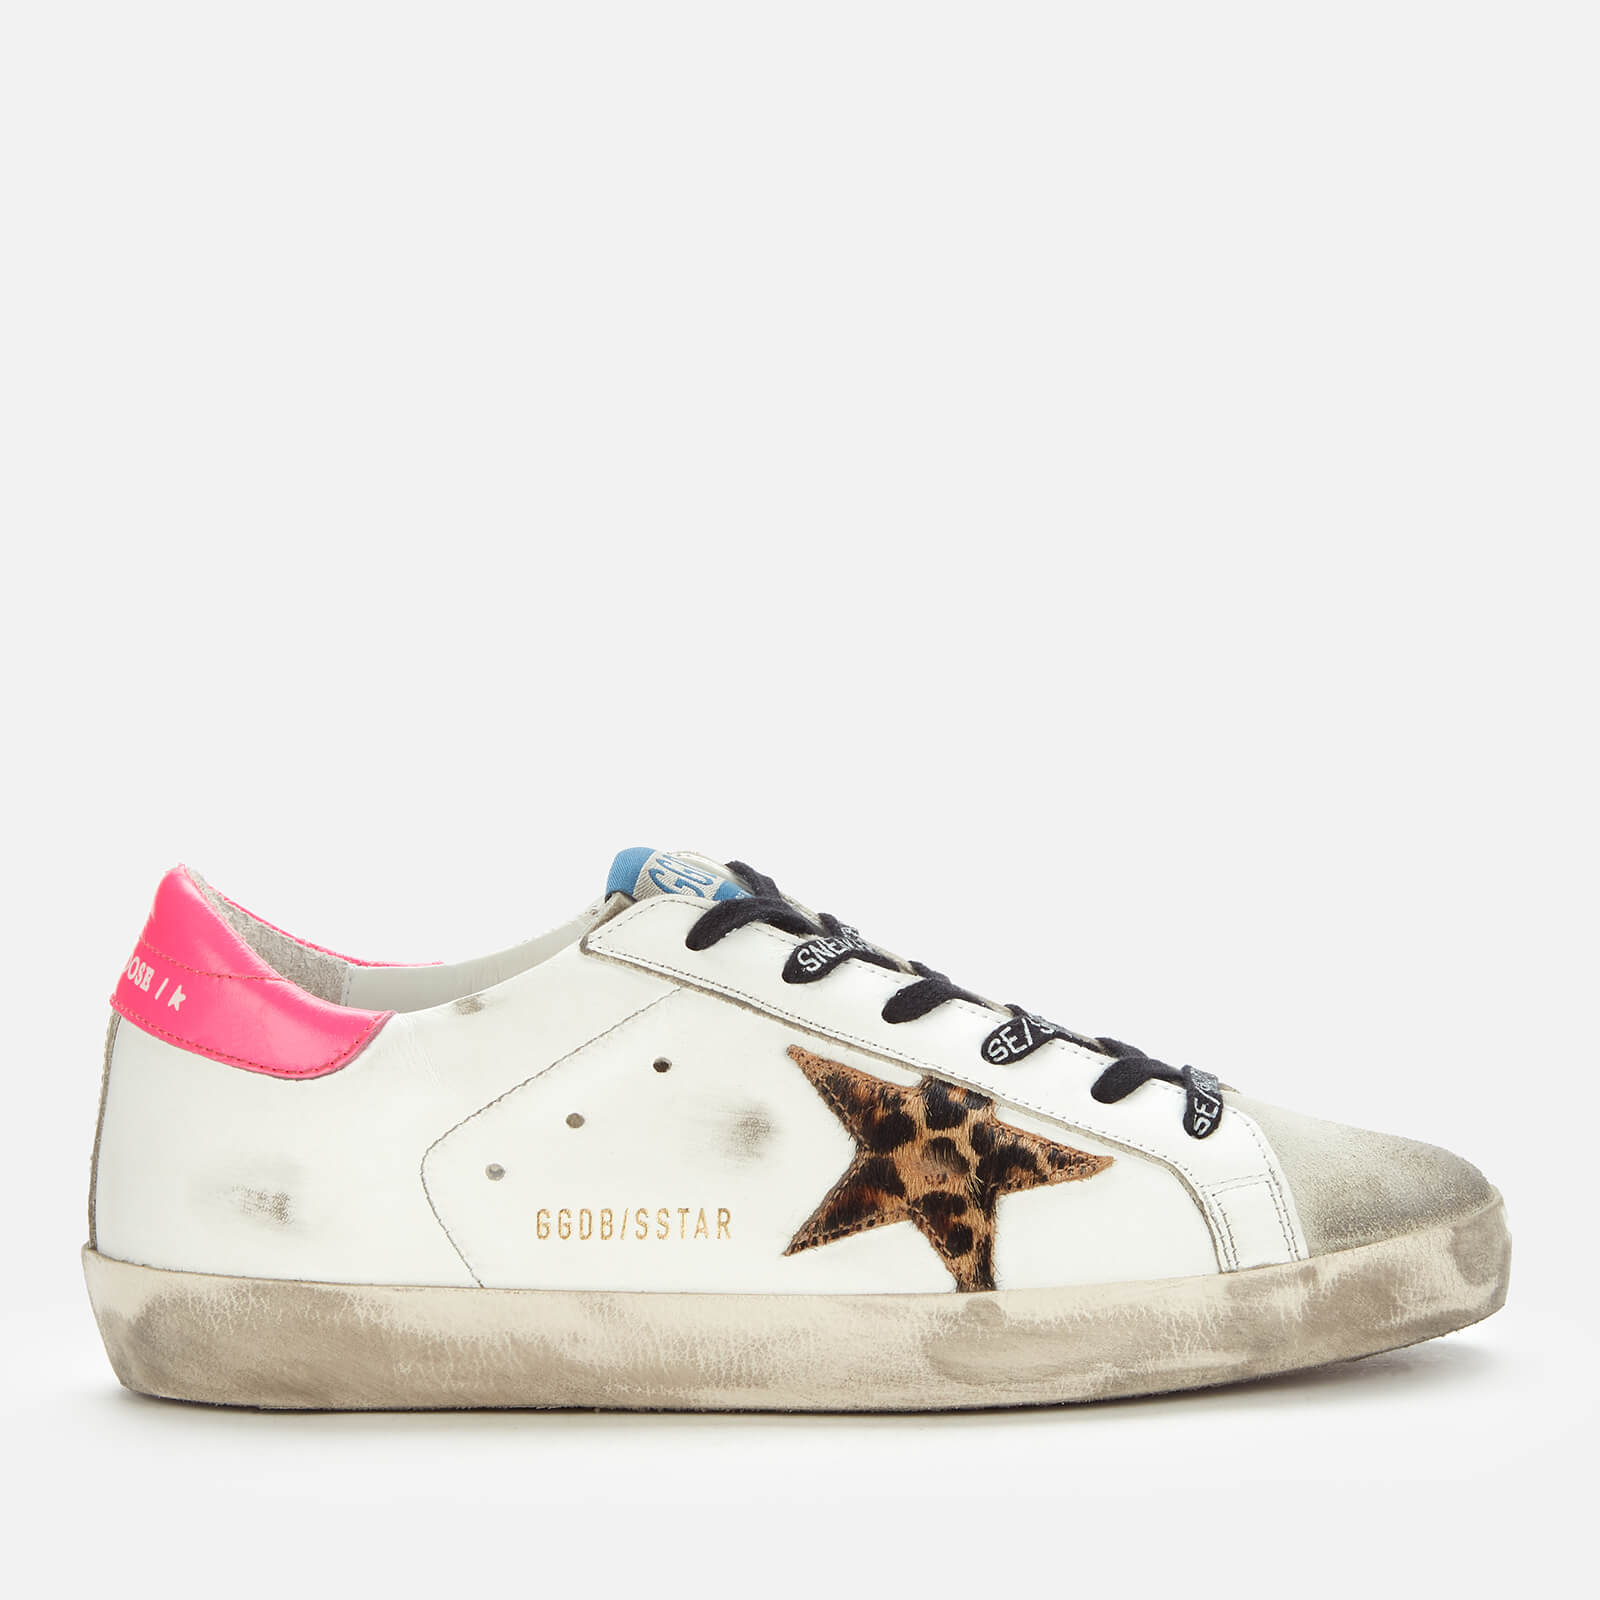 Golden Goose Deluxe Brand Women's Superstar Leather Trainers - Ice/White/Leopard - UK 8